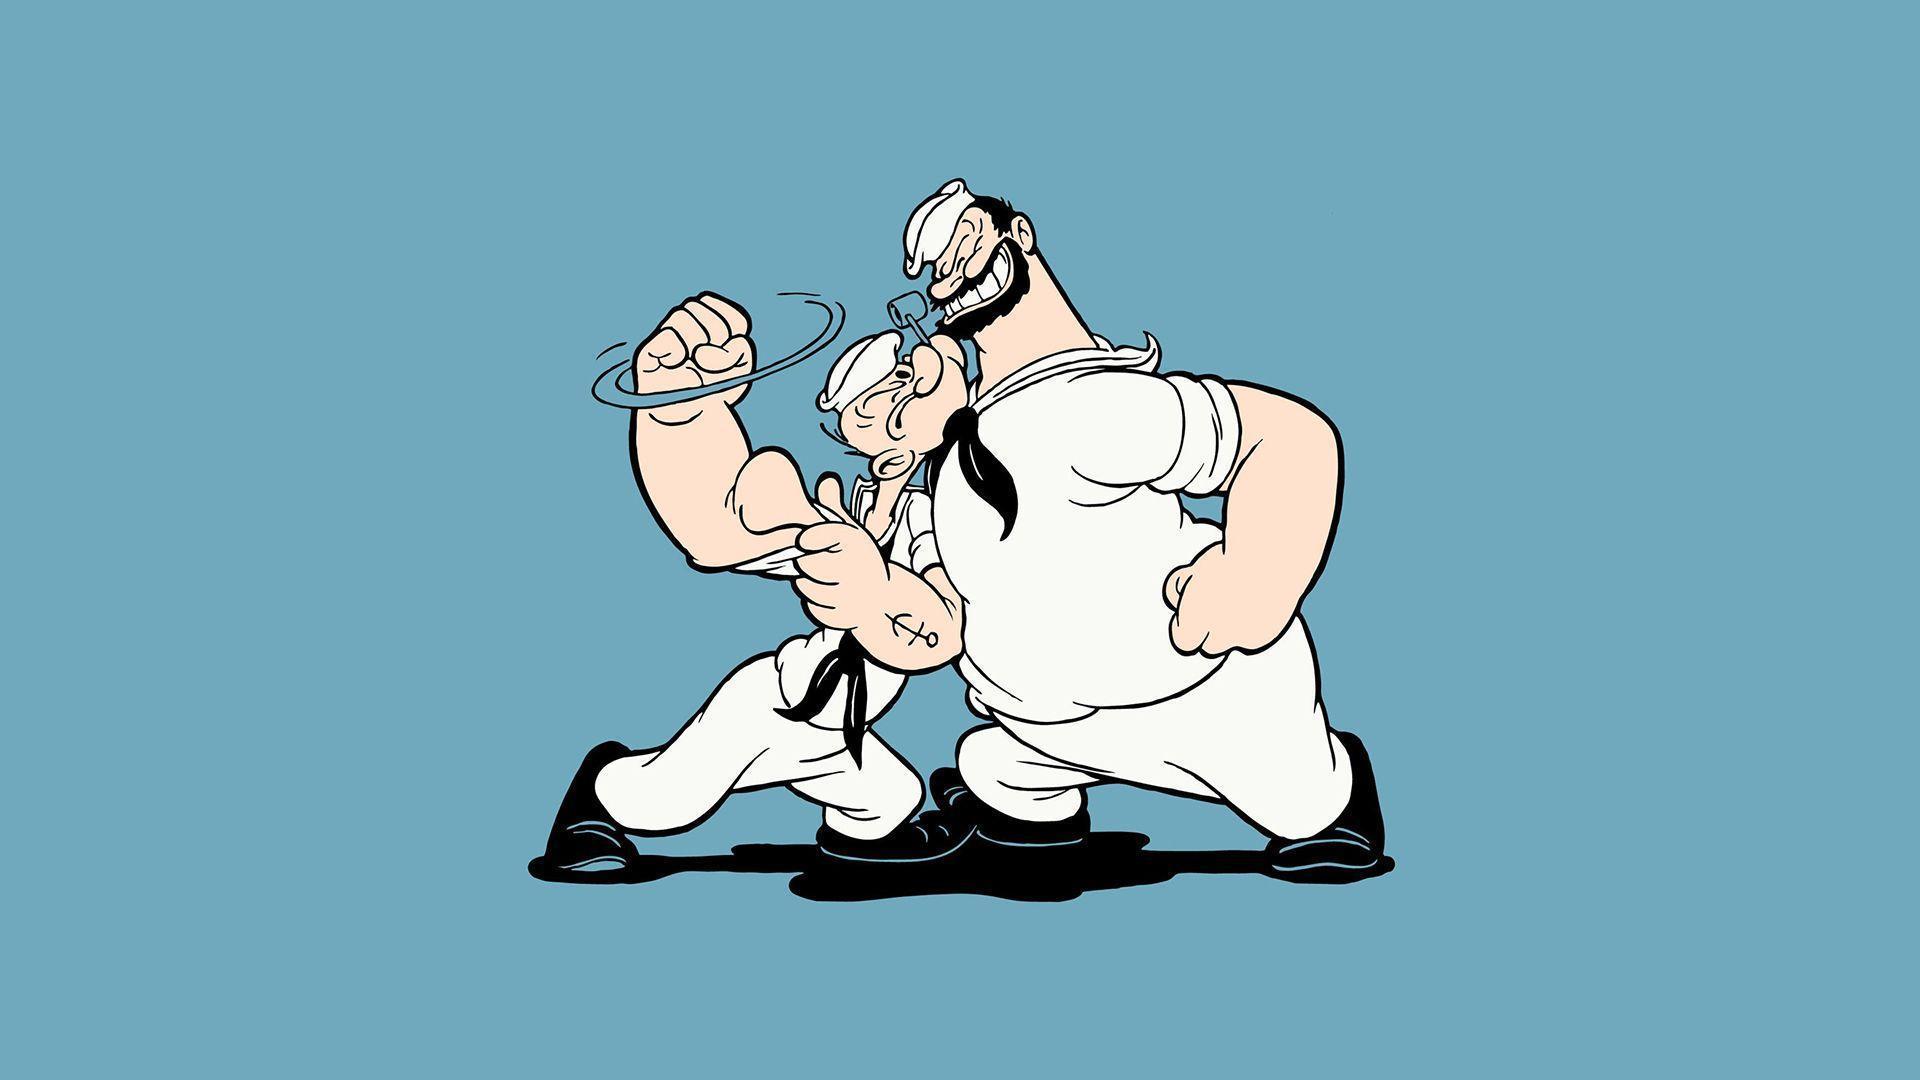 Popeye Wallpaper, Picture, Image